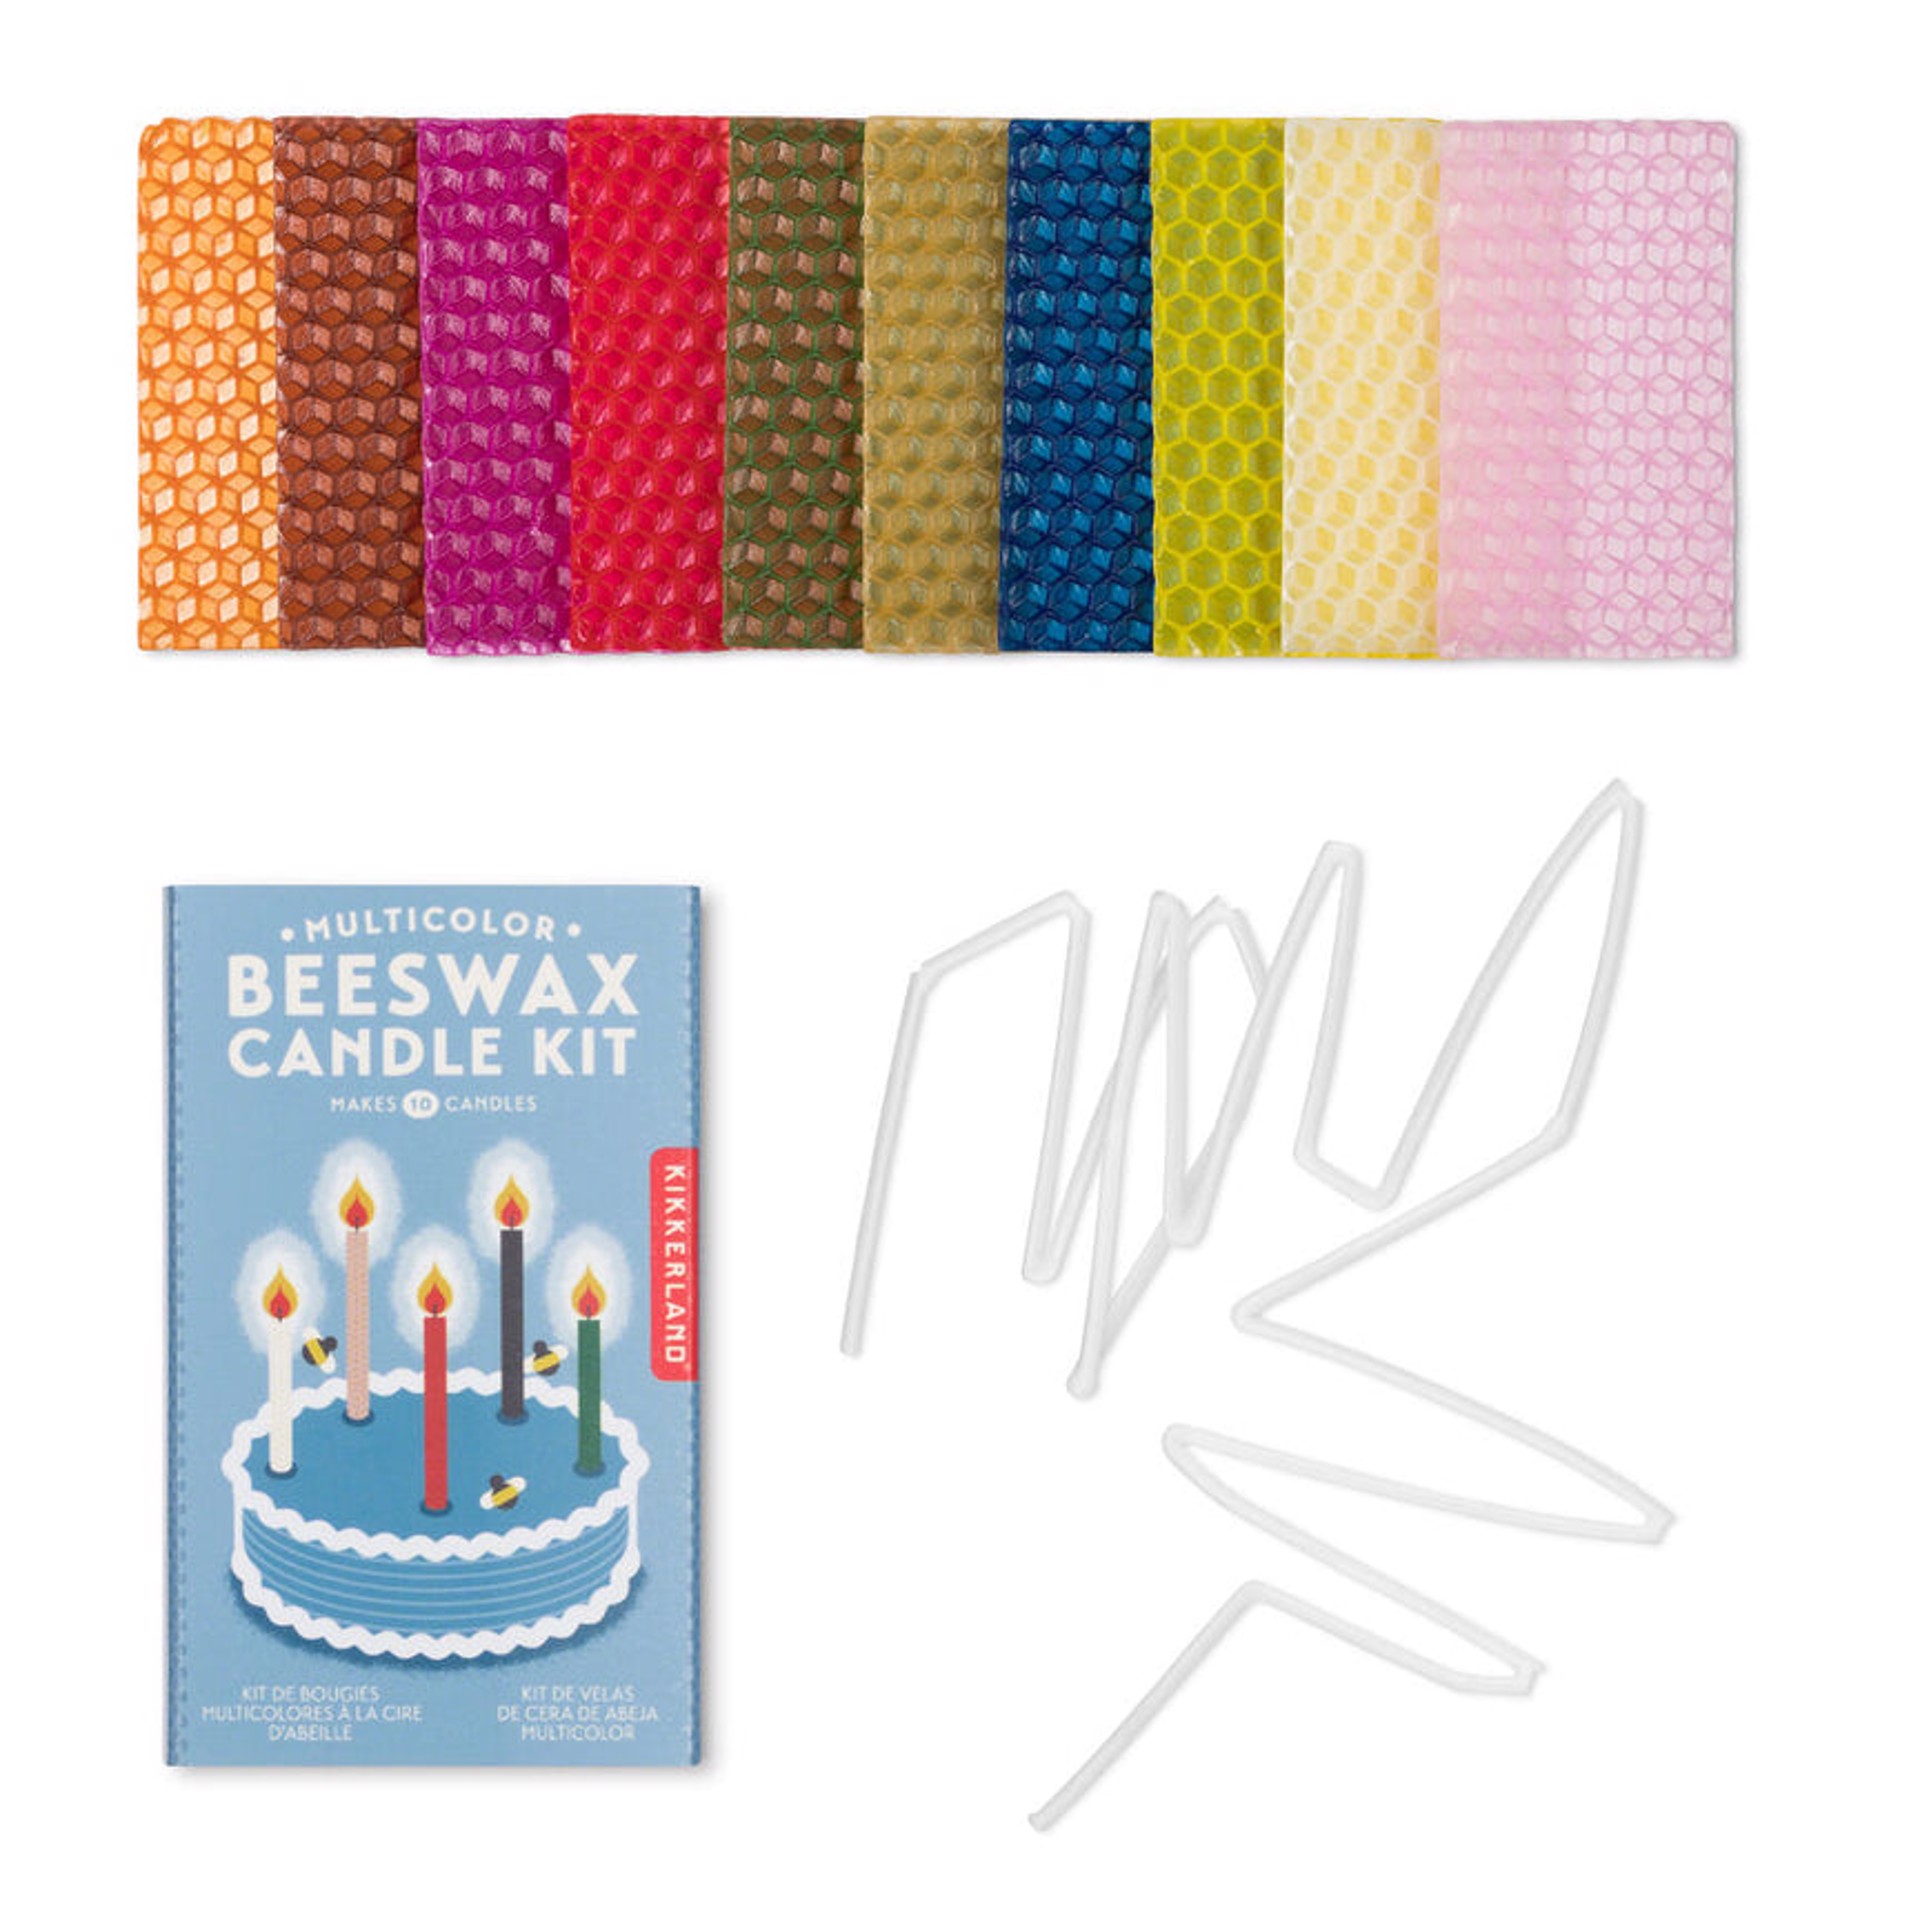 Multicolor Beeswax Candle Kit by Chauvet Arts